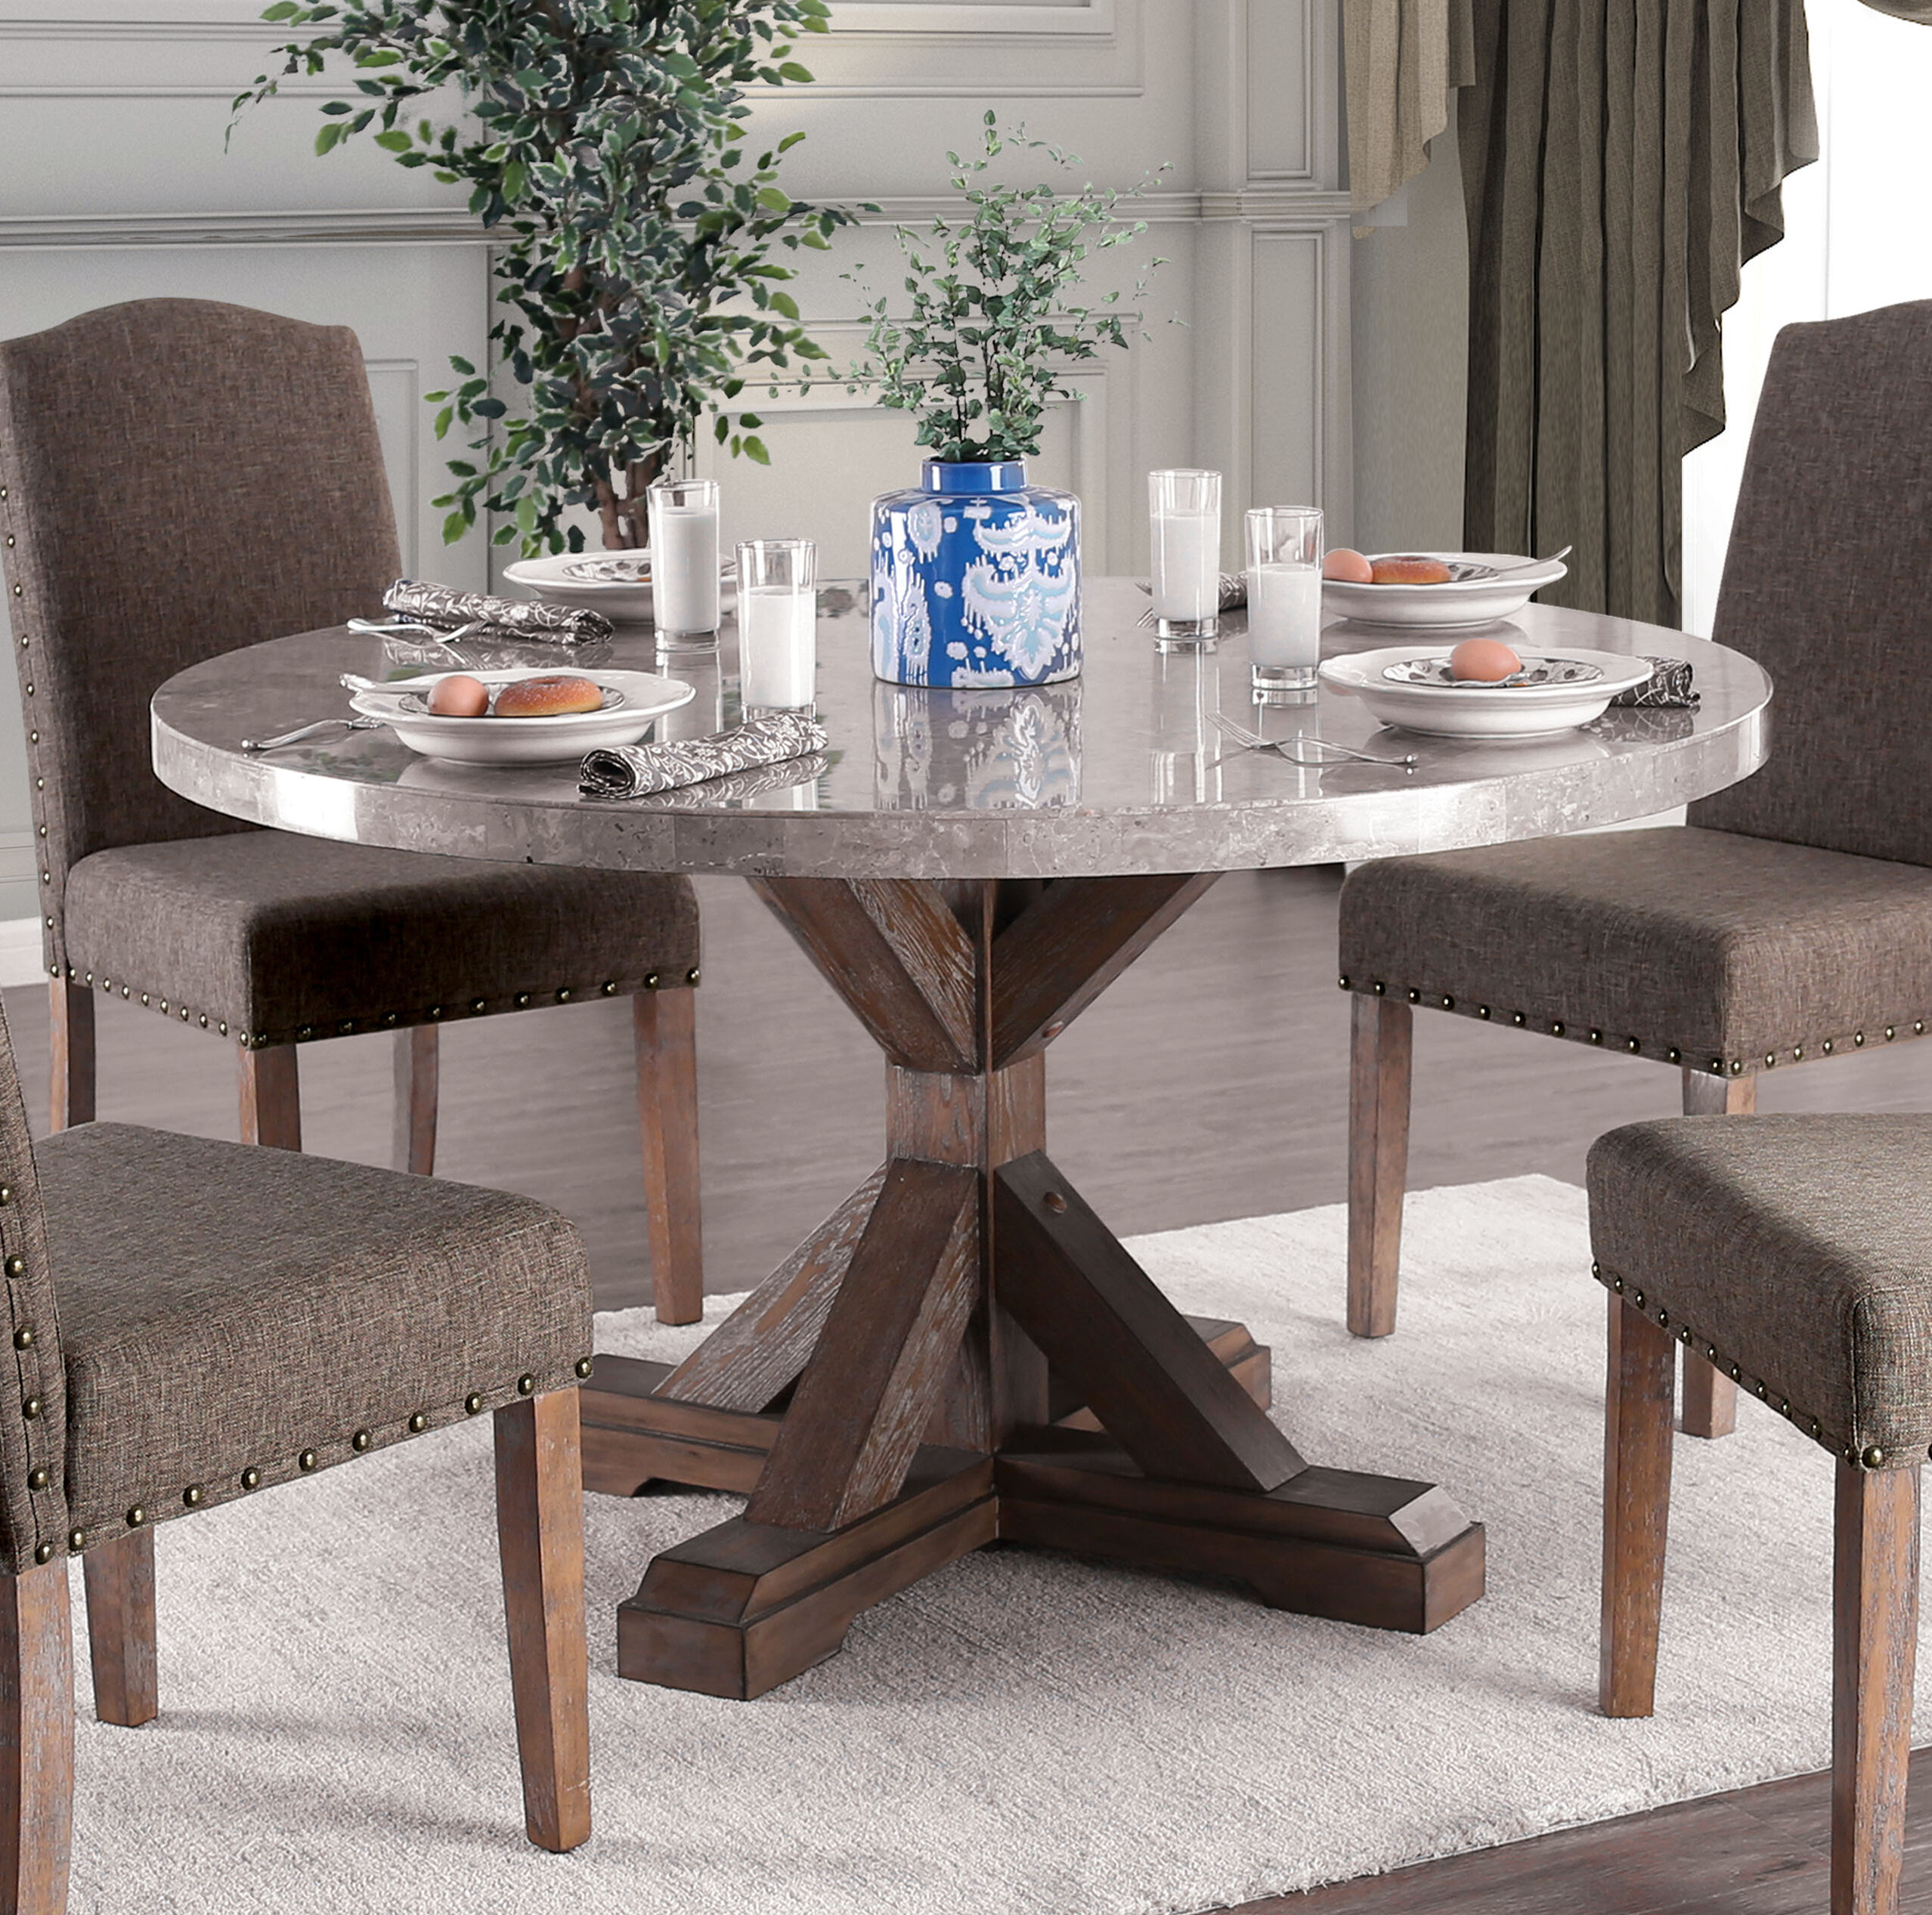 Granite Top Dining Table Visualhunt, Round Stone Dining Table For 4